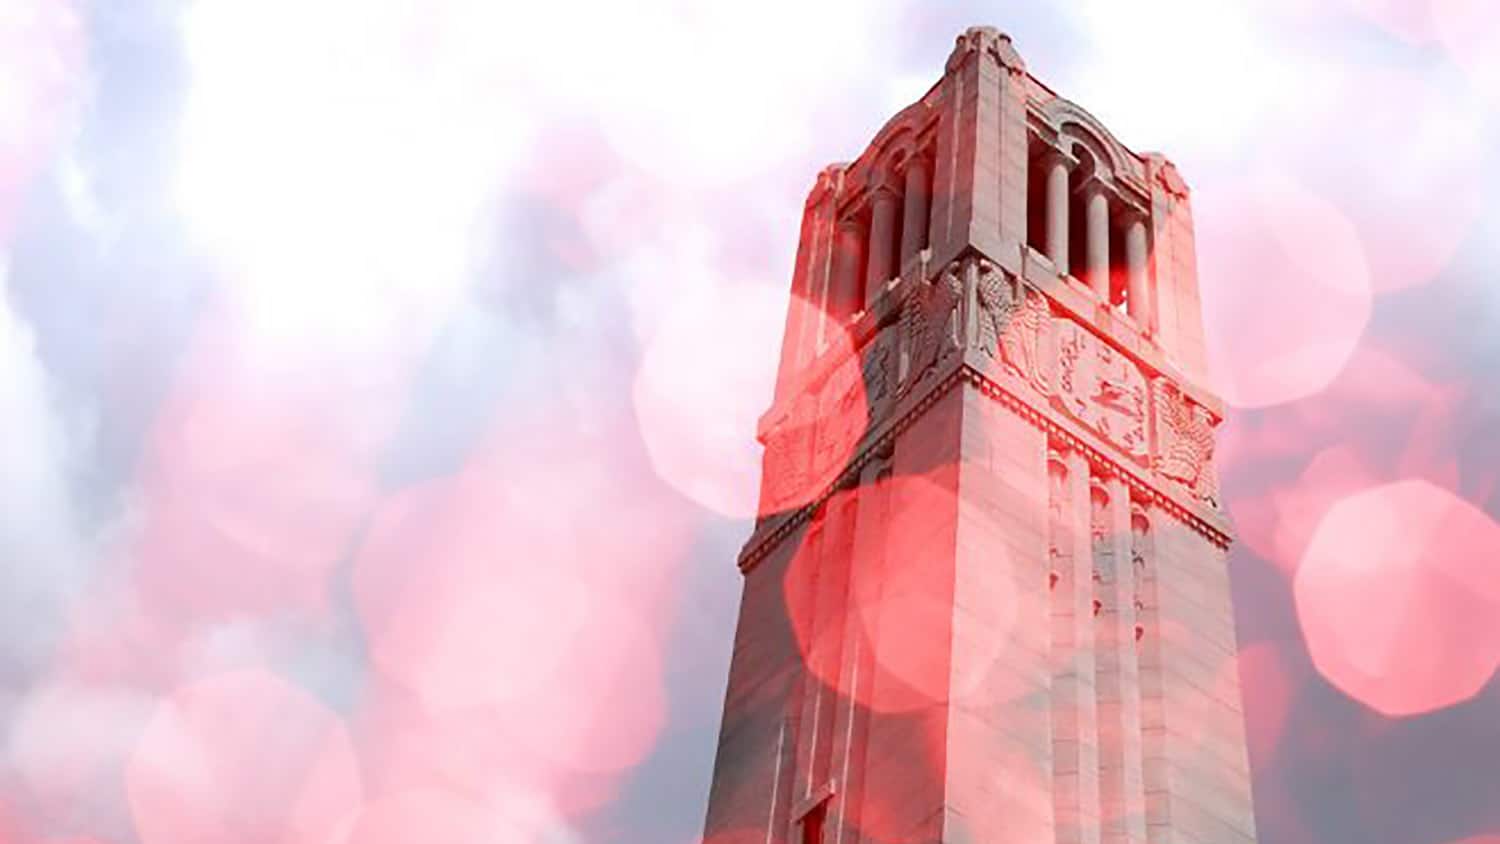 The NC State Belltower